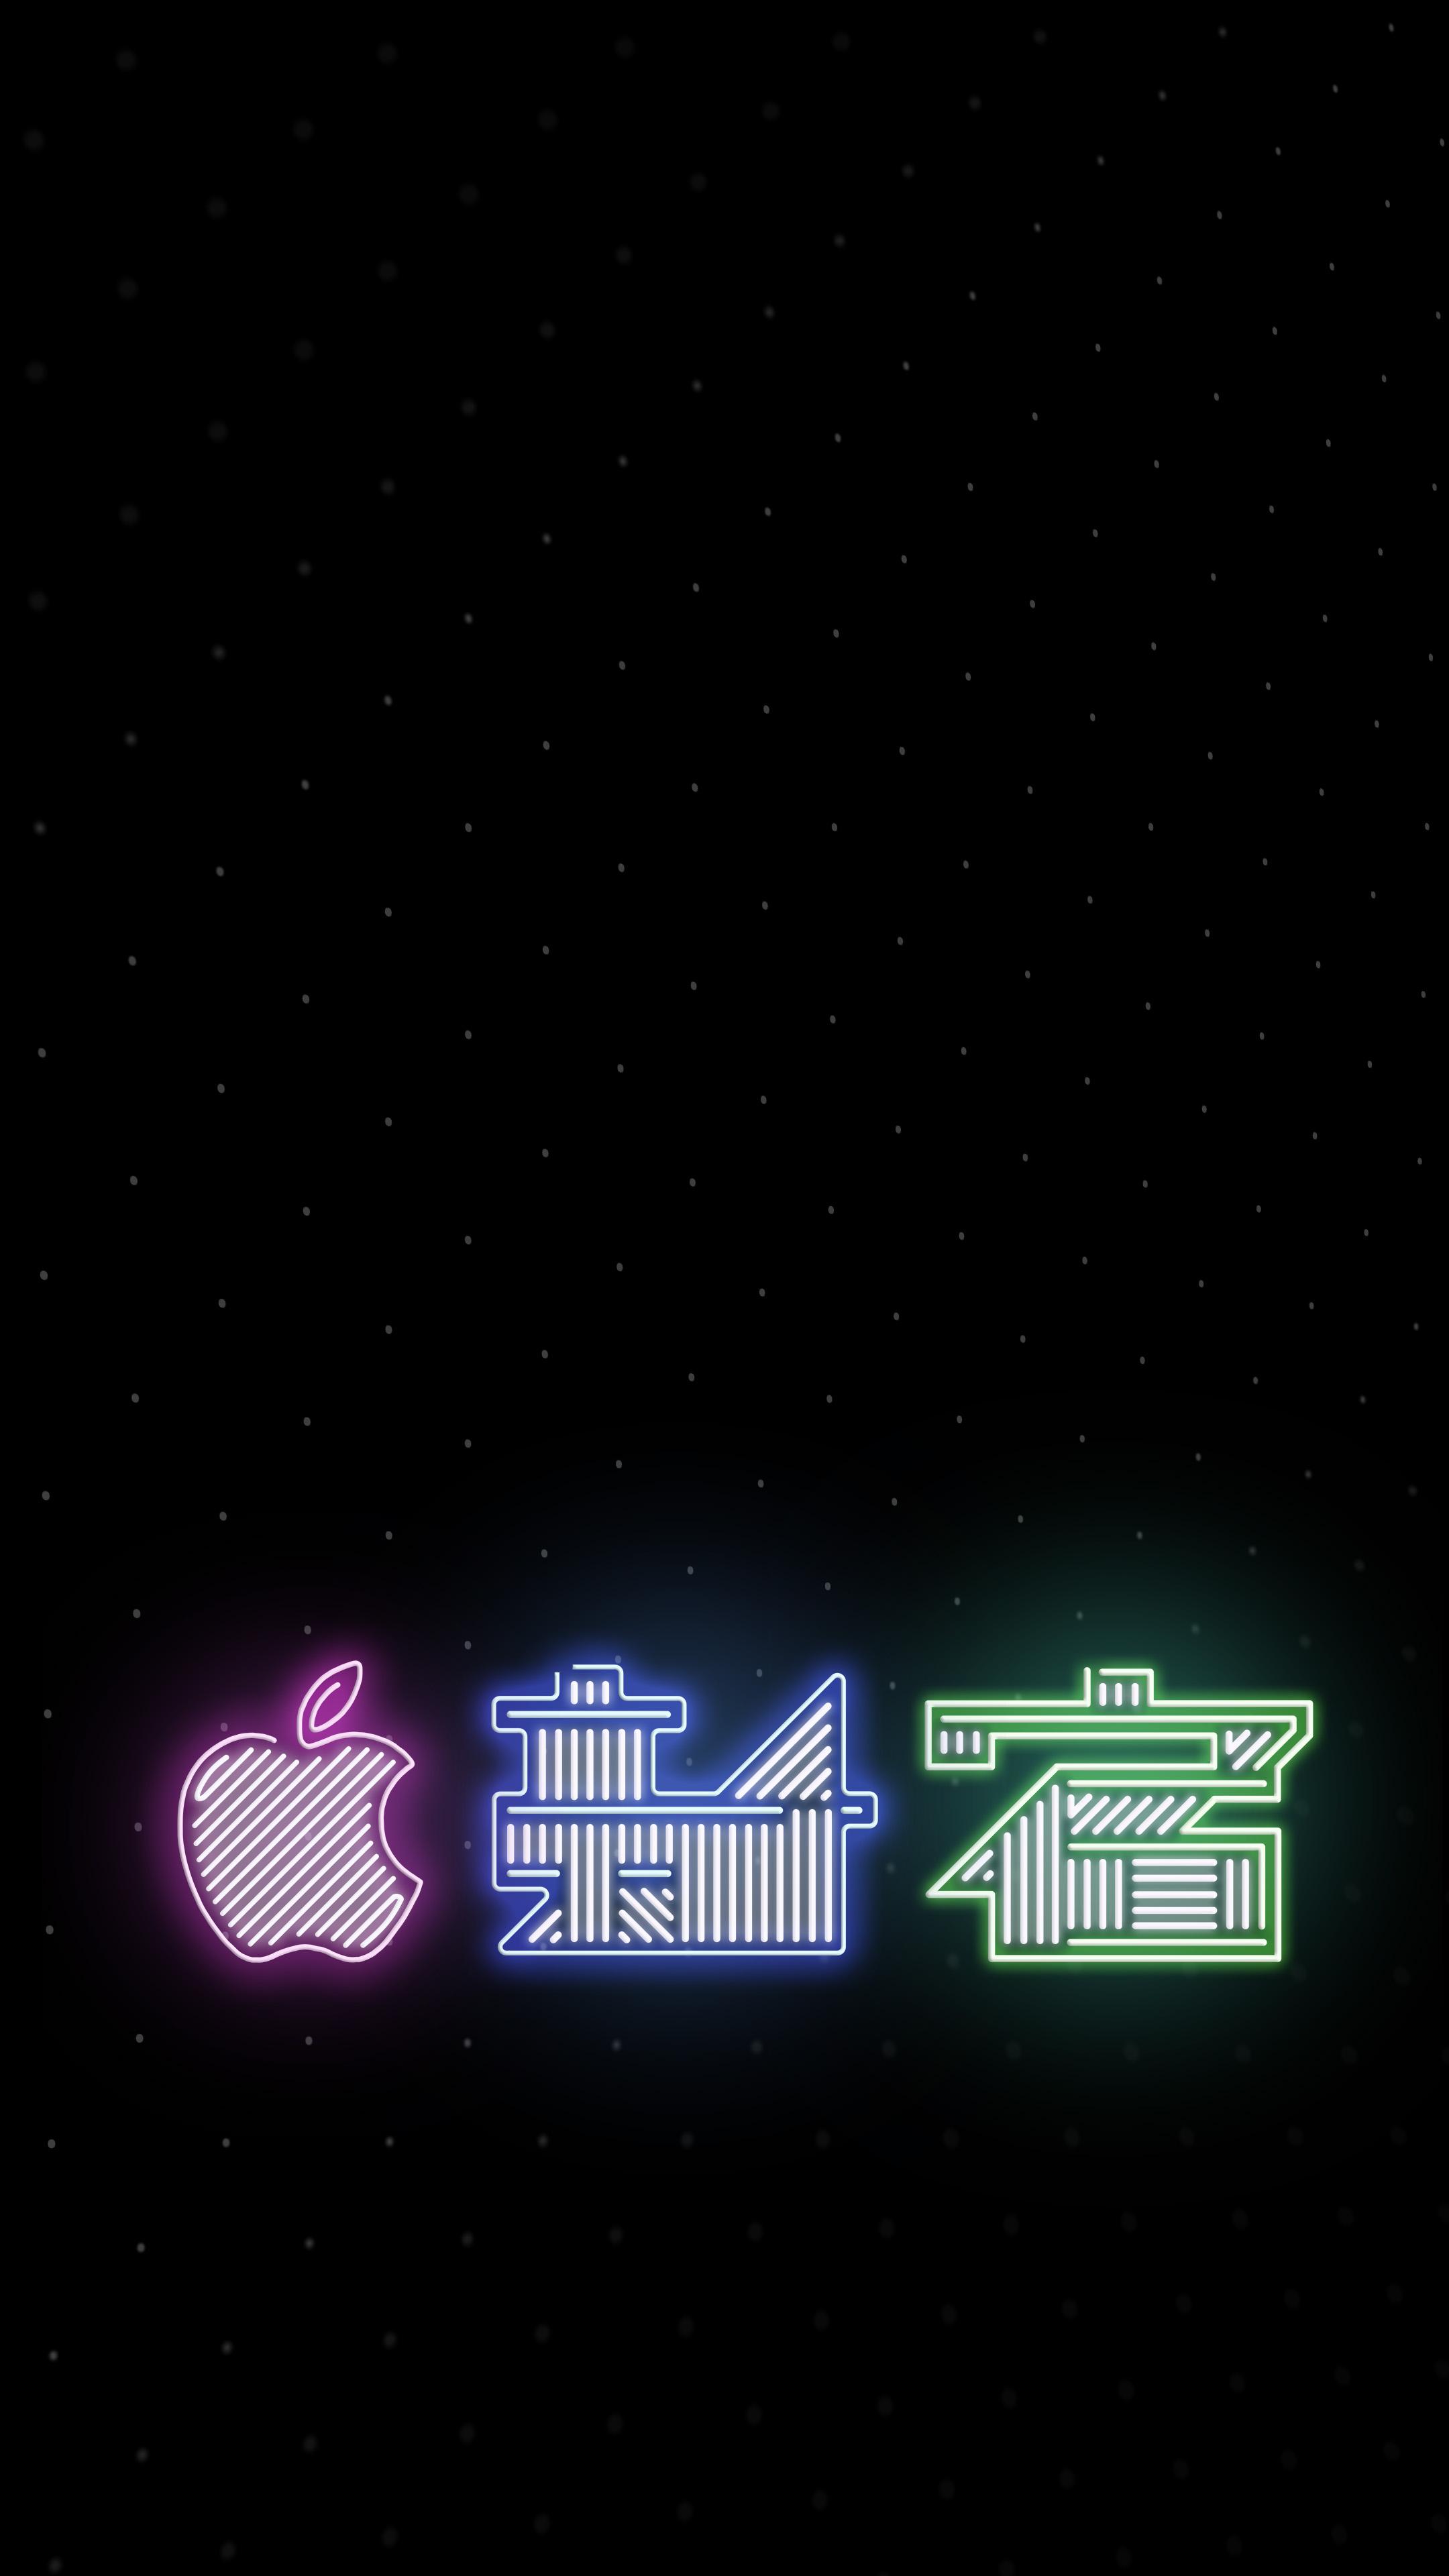 The Complete Neon Apple Wallpaper Collection